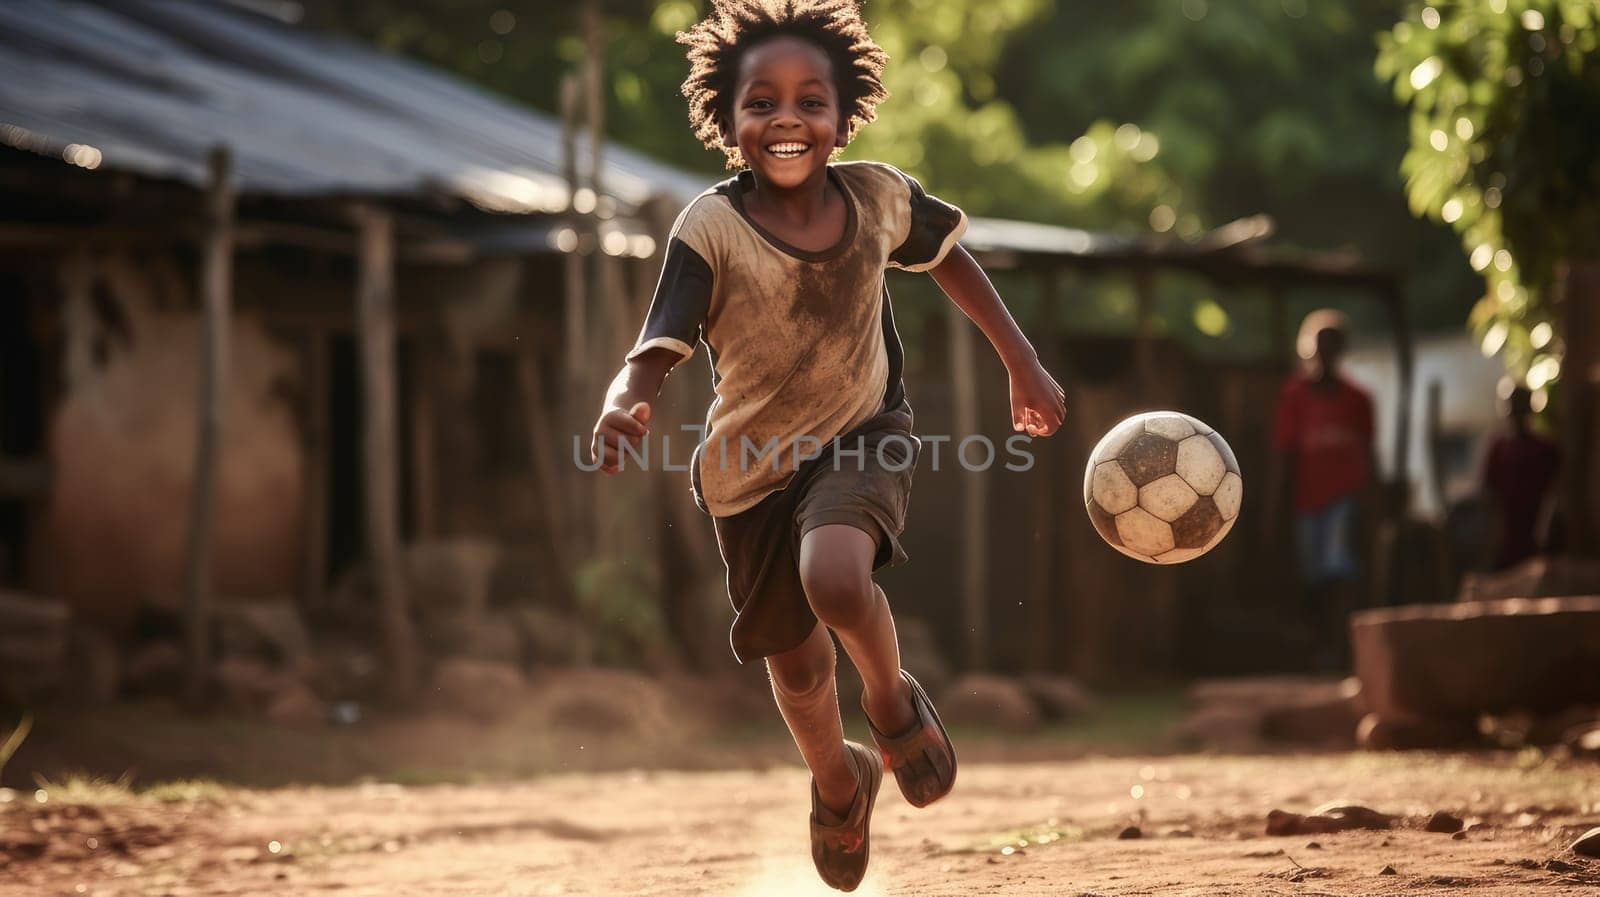 A poor, beggar, talented happy black African boy plays football with a soccer ball his village. Water shortage on Earth due to global warming, drought, famine. Climate change, crisis environment, water crisis. Saving natural resources, planet suffers